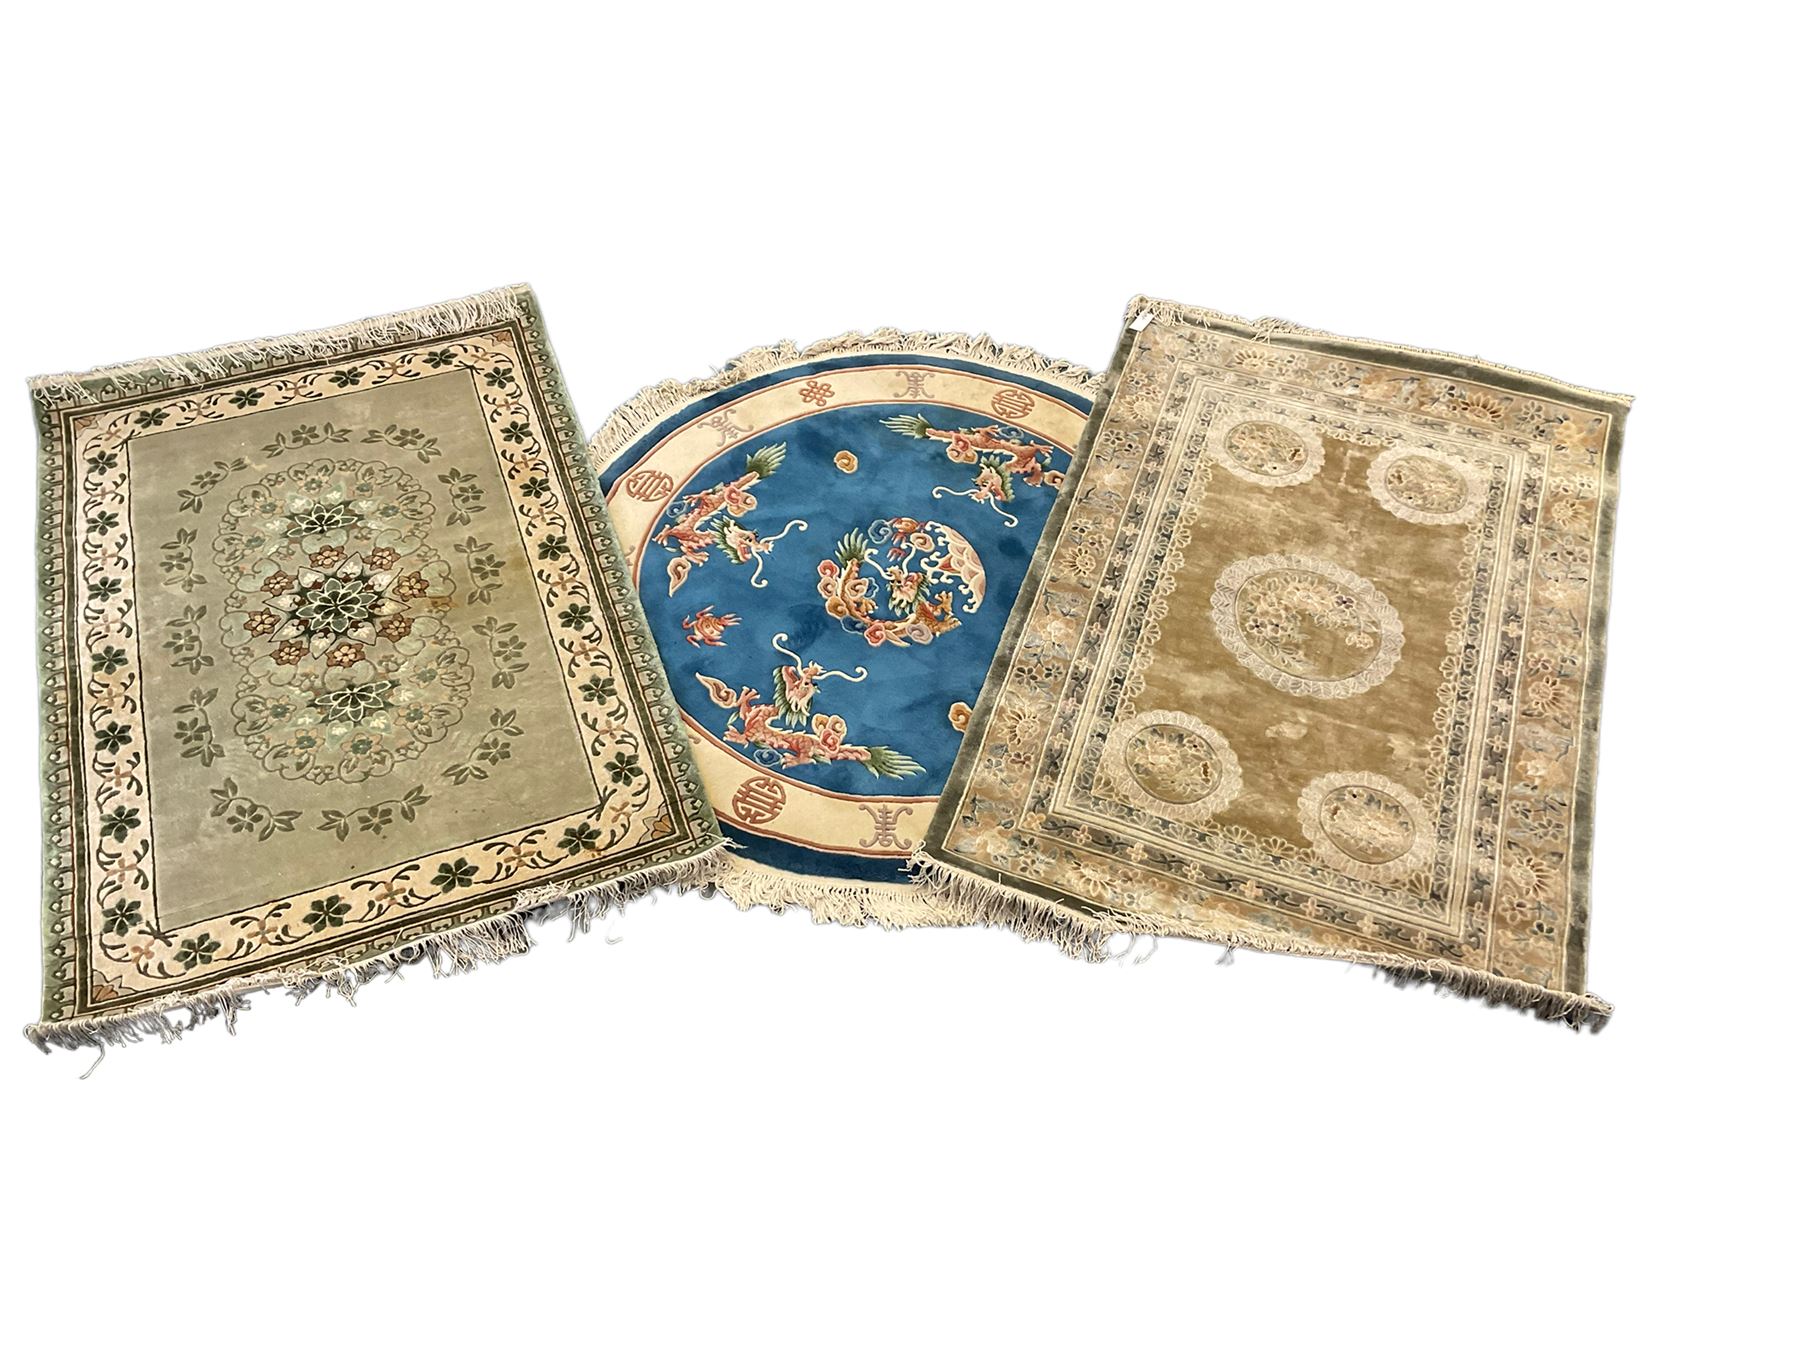 Three Chinese washed woollen rugs - circular blue ground decorated with dragons (D160cm)